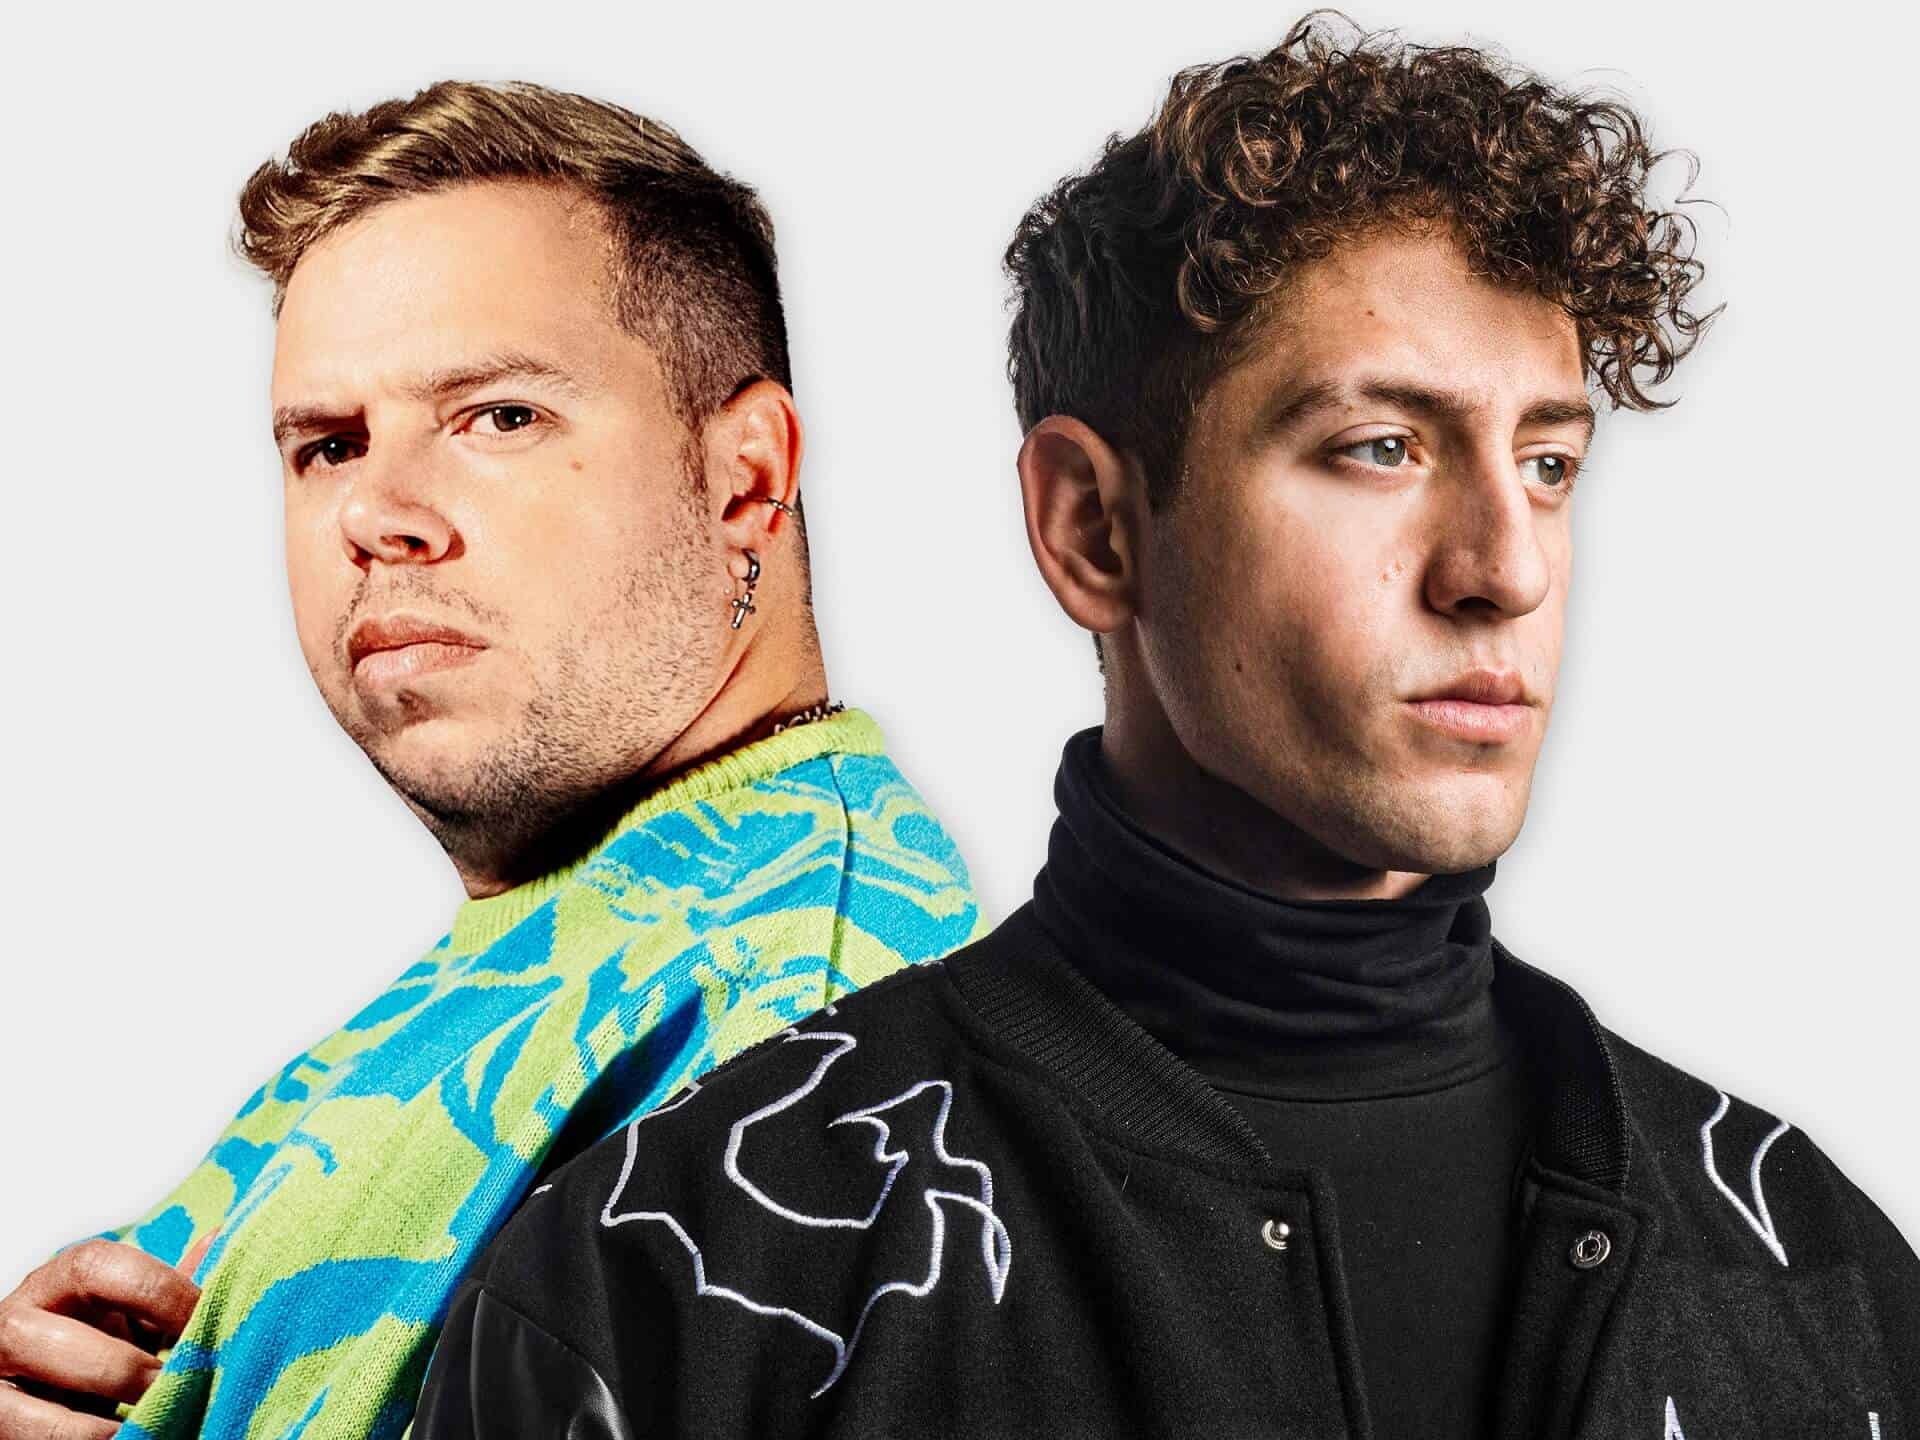 Gian Varela & Tom Enzy collaborate for spicy Latin-influenced tech-house track ‘Lo Que Siento’: Listen